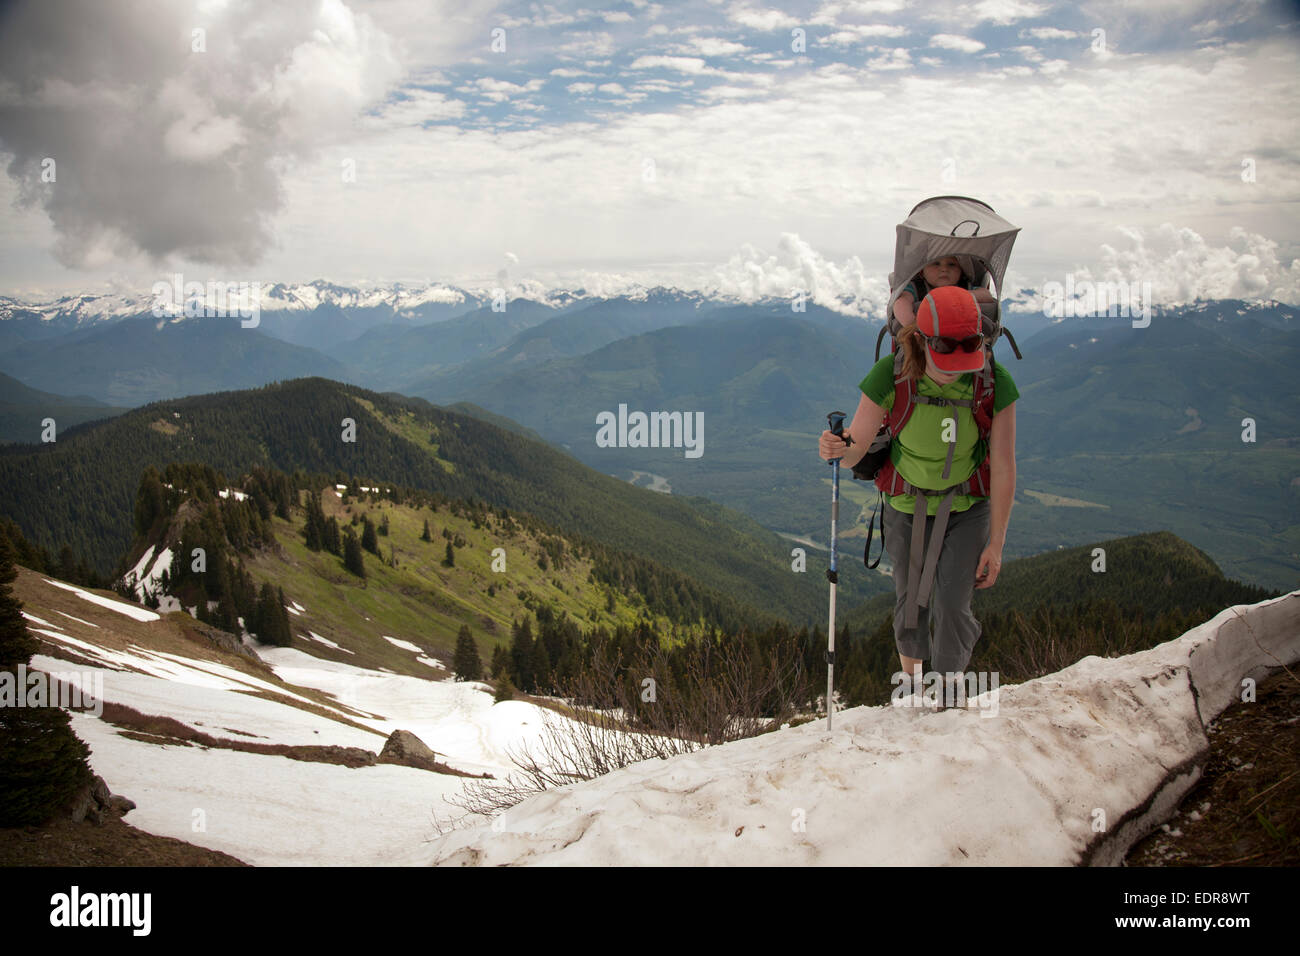 A woman carrying an infant hiking in the mountains. hiking in the mountains. Stock Photo